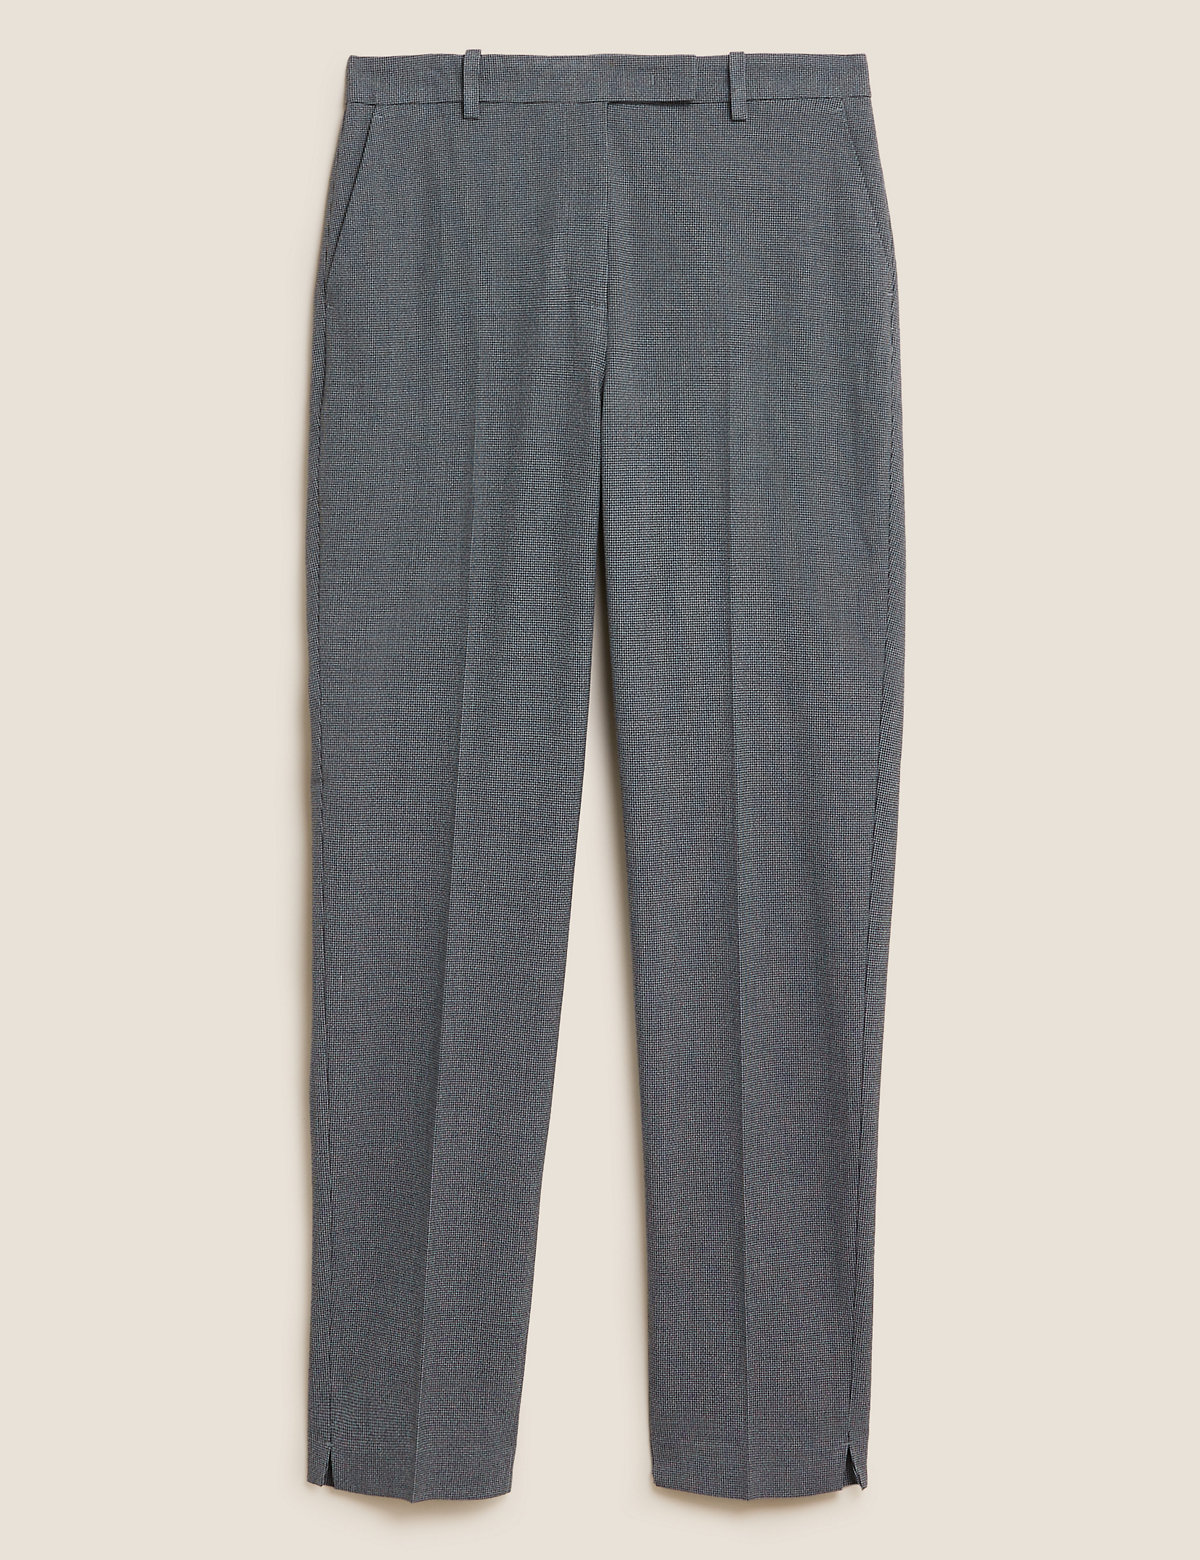 Crepe Checked Slim Fit Trousers